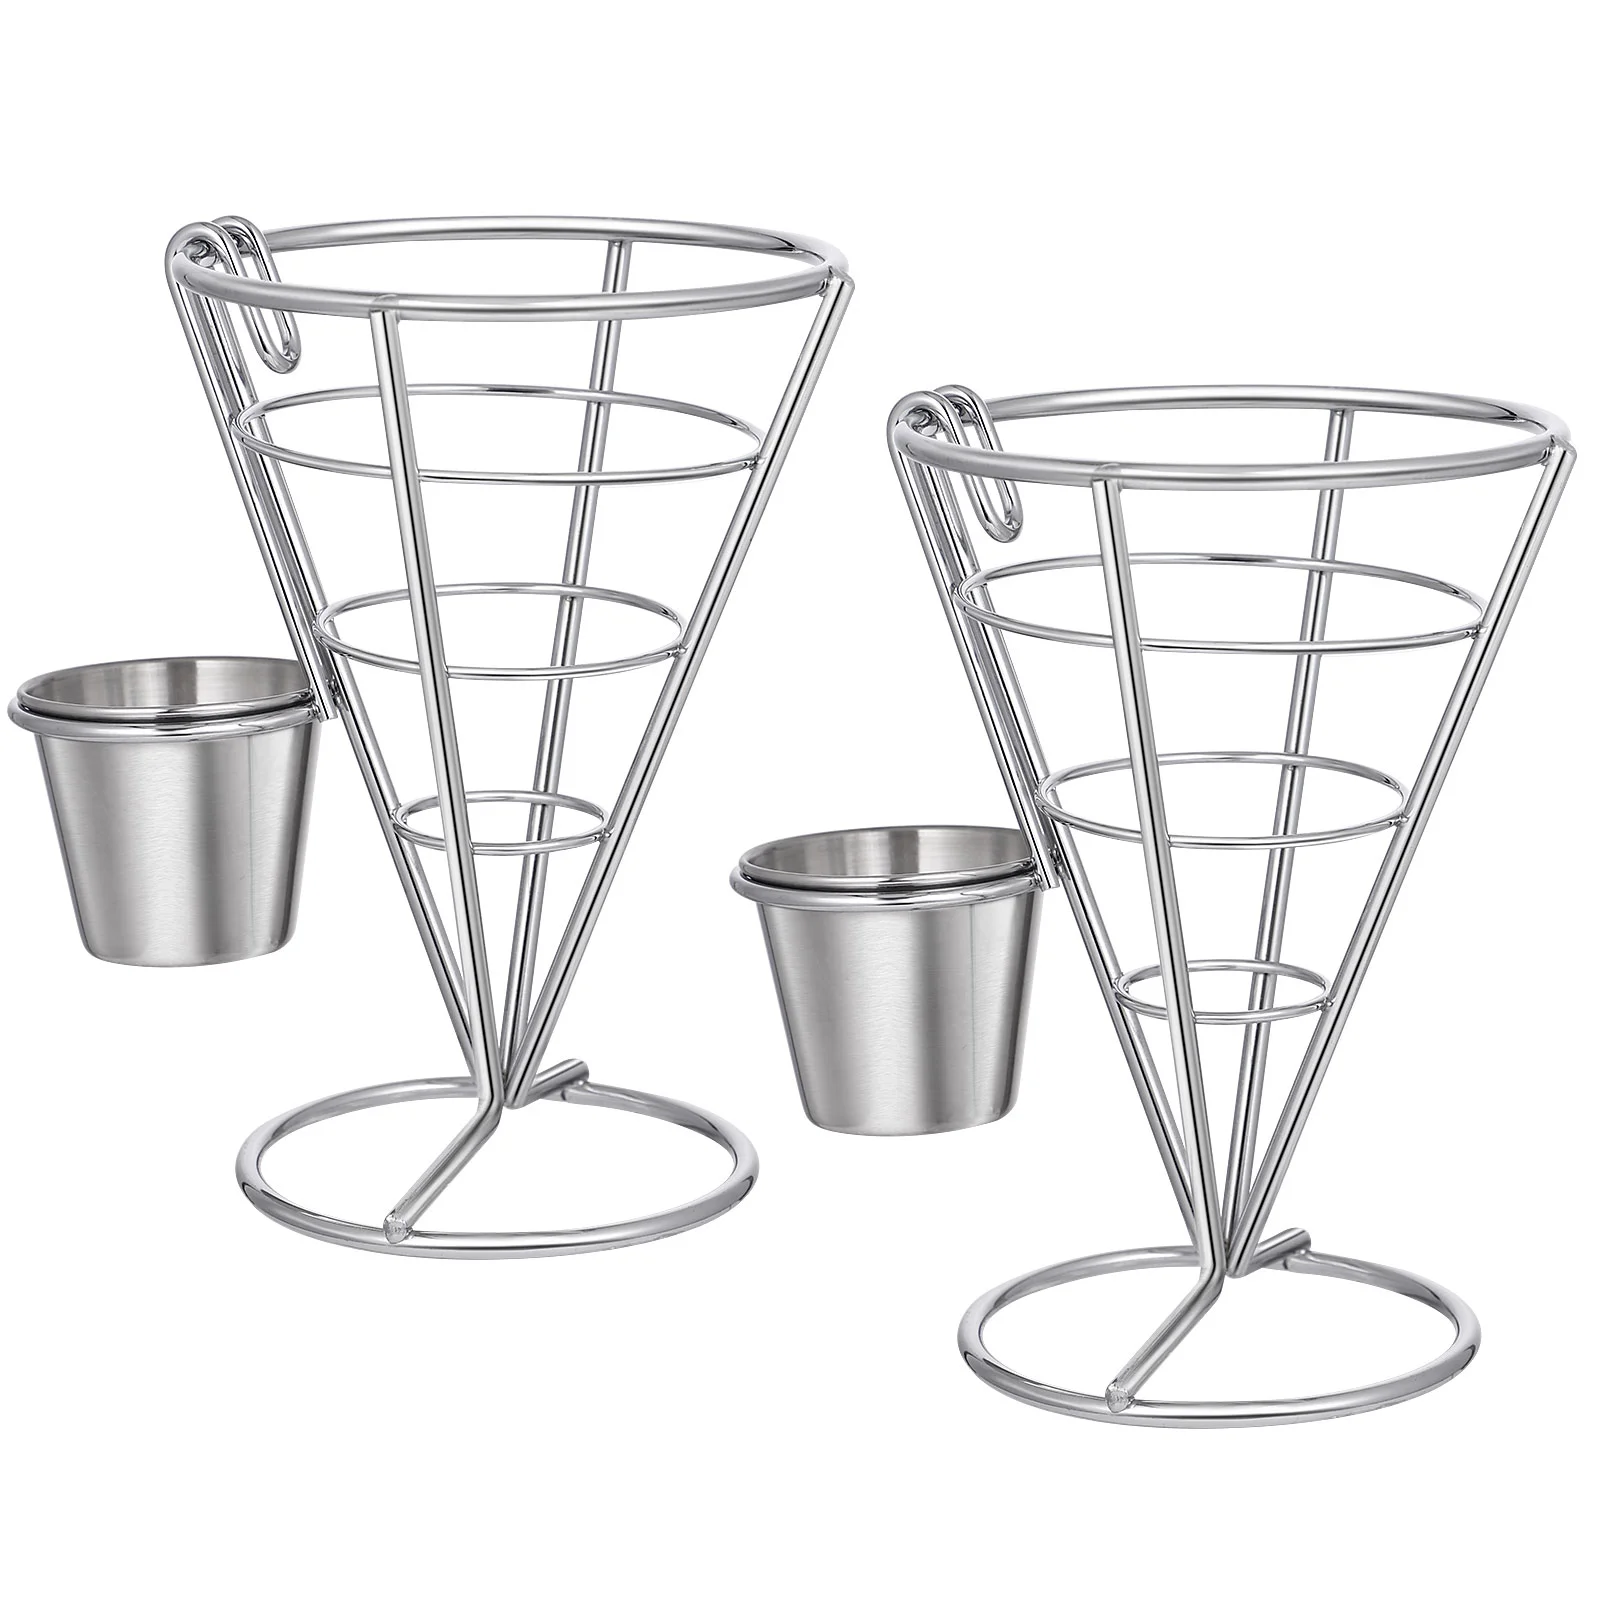 

2PCS Metal French Fry Holder Cone, Wire French Fry Serving Basket with Dip Compartment for Party Restaurant Bar Picnics and